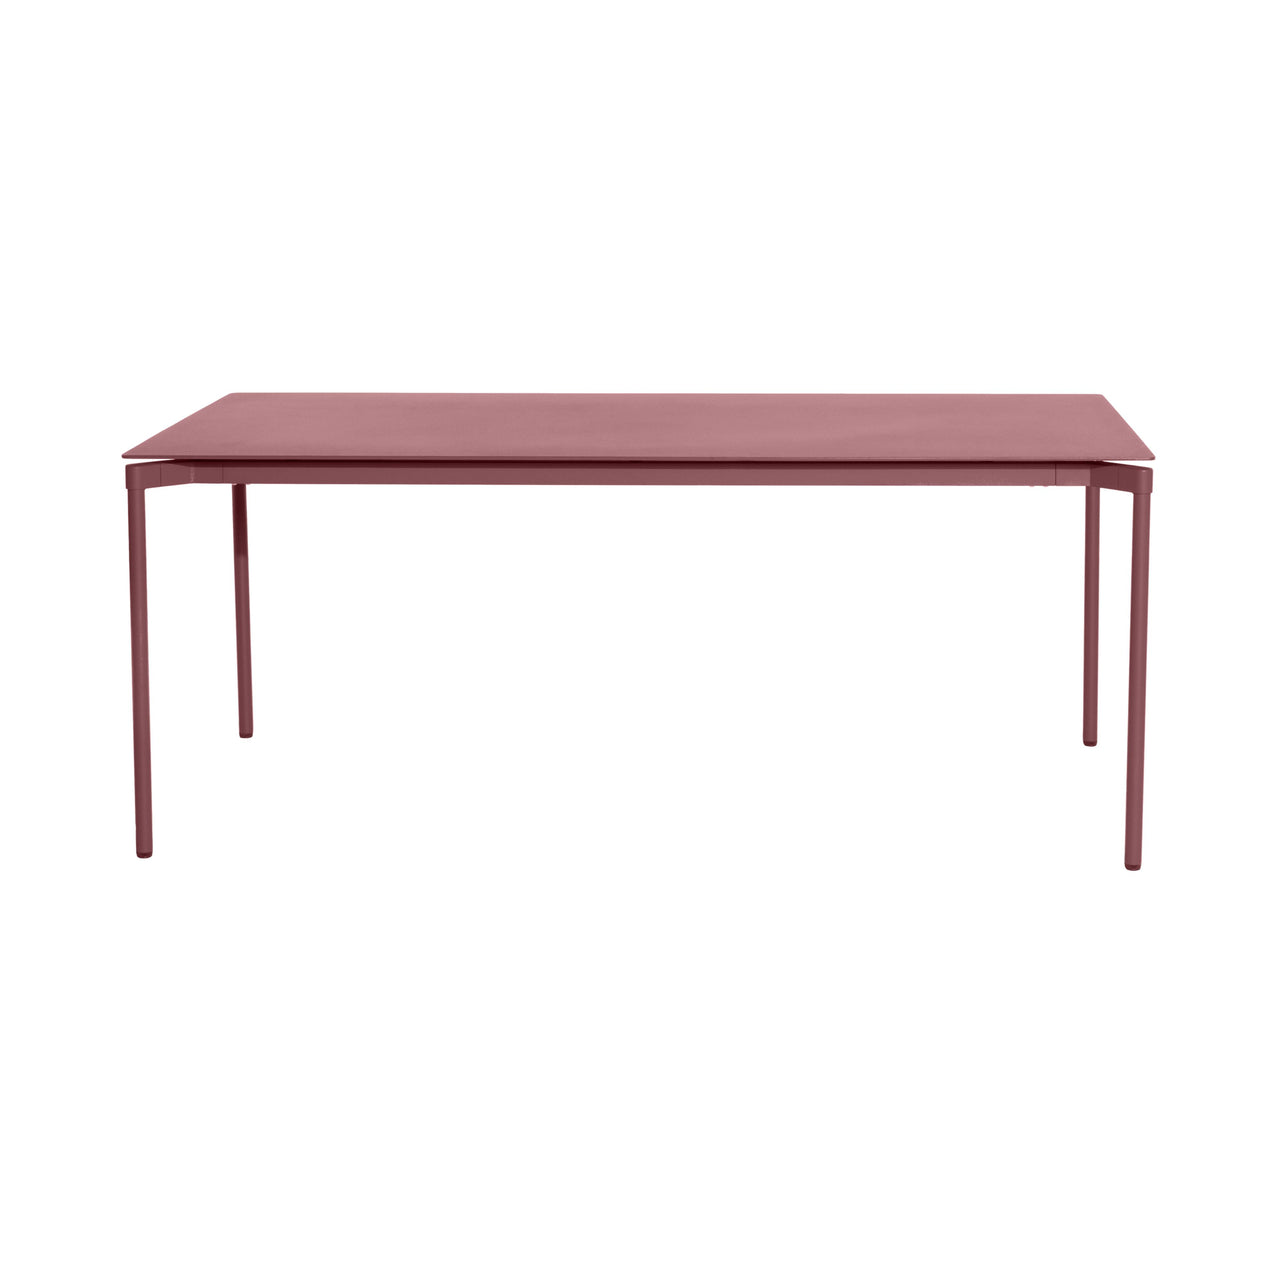 Fromme Dining Table: Outdoor + Rectangle + Brown Red